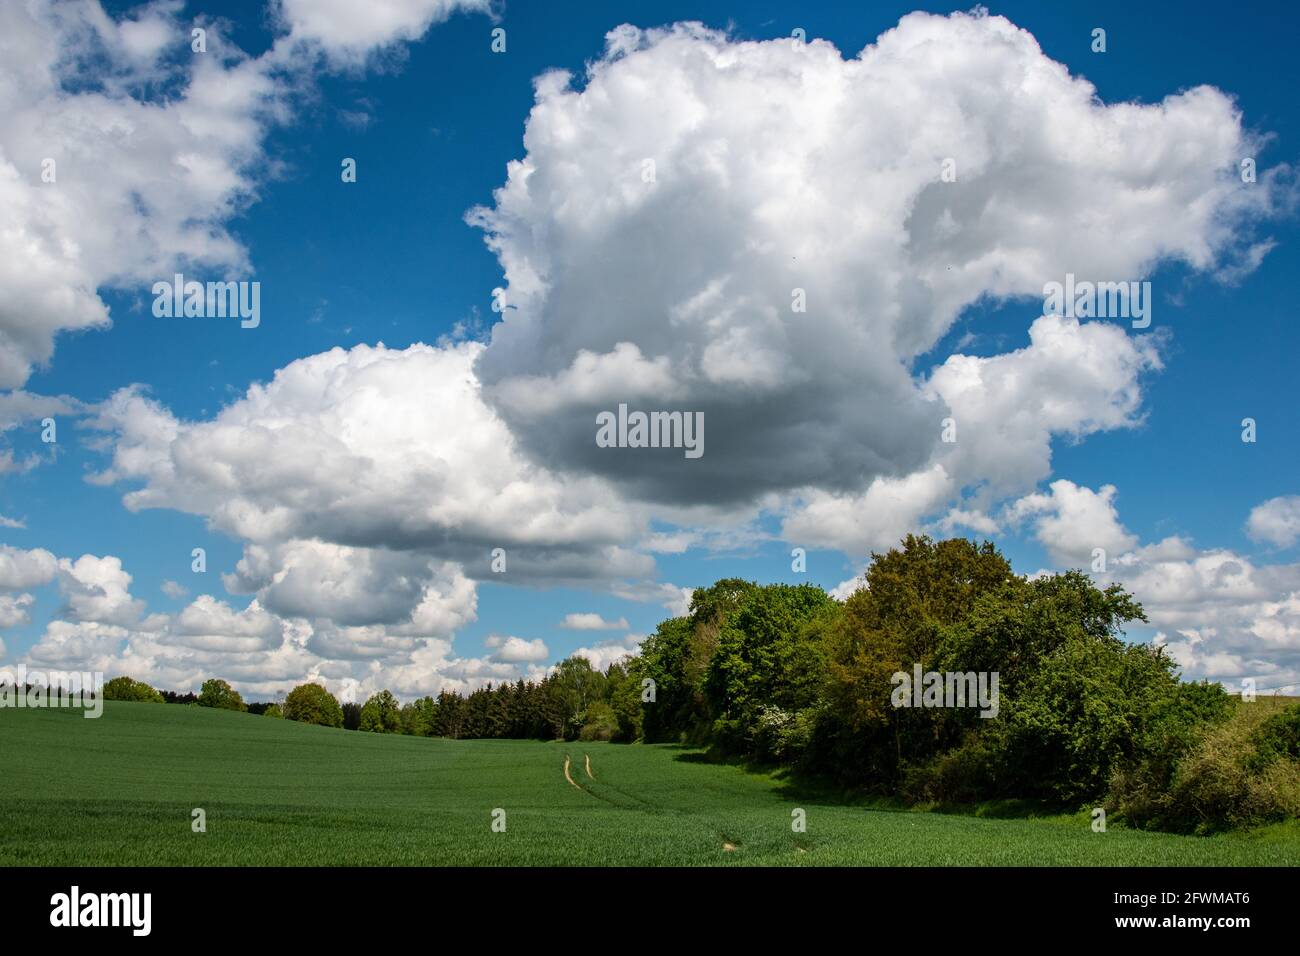 Group of trees on grassland Stock Photo